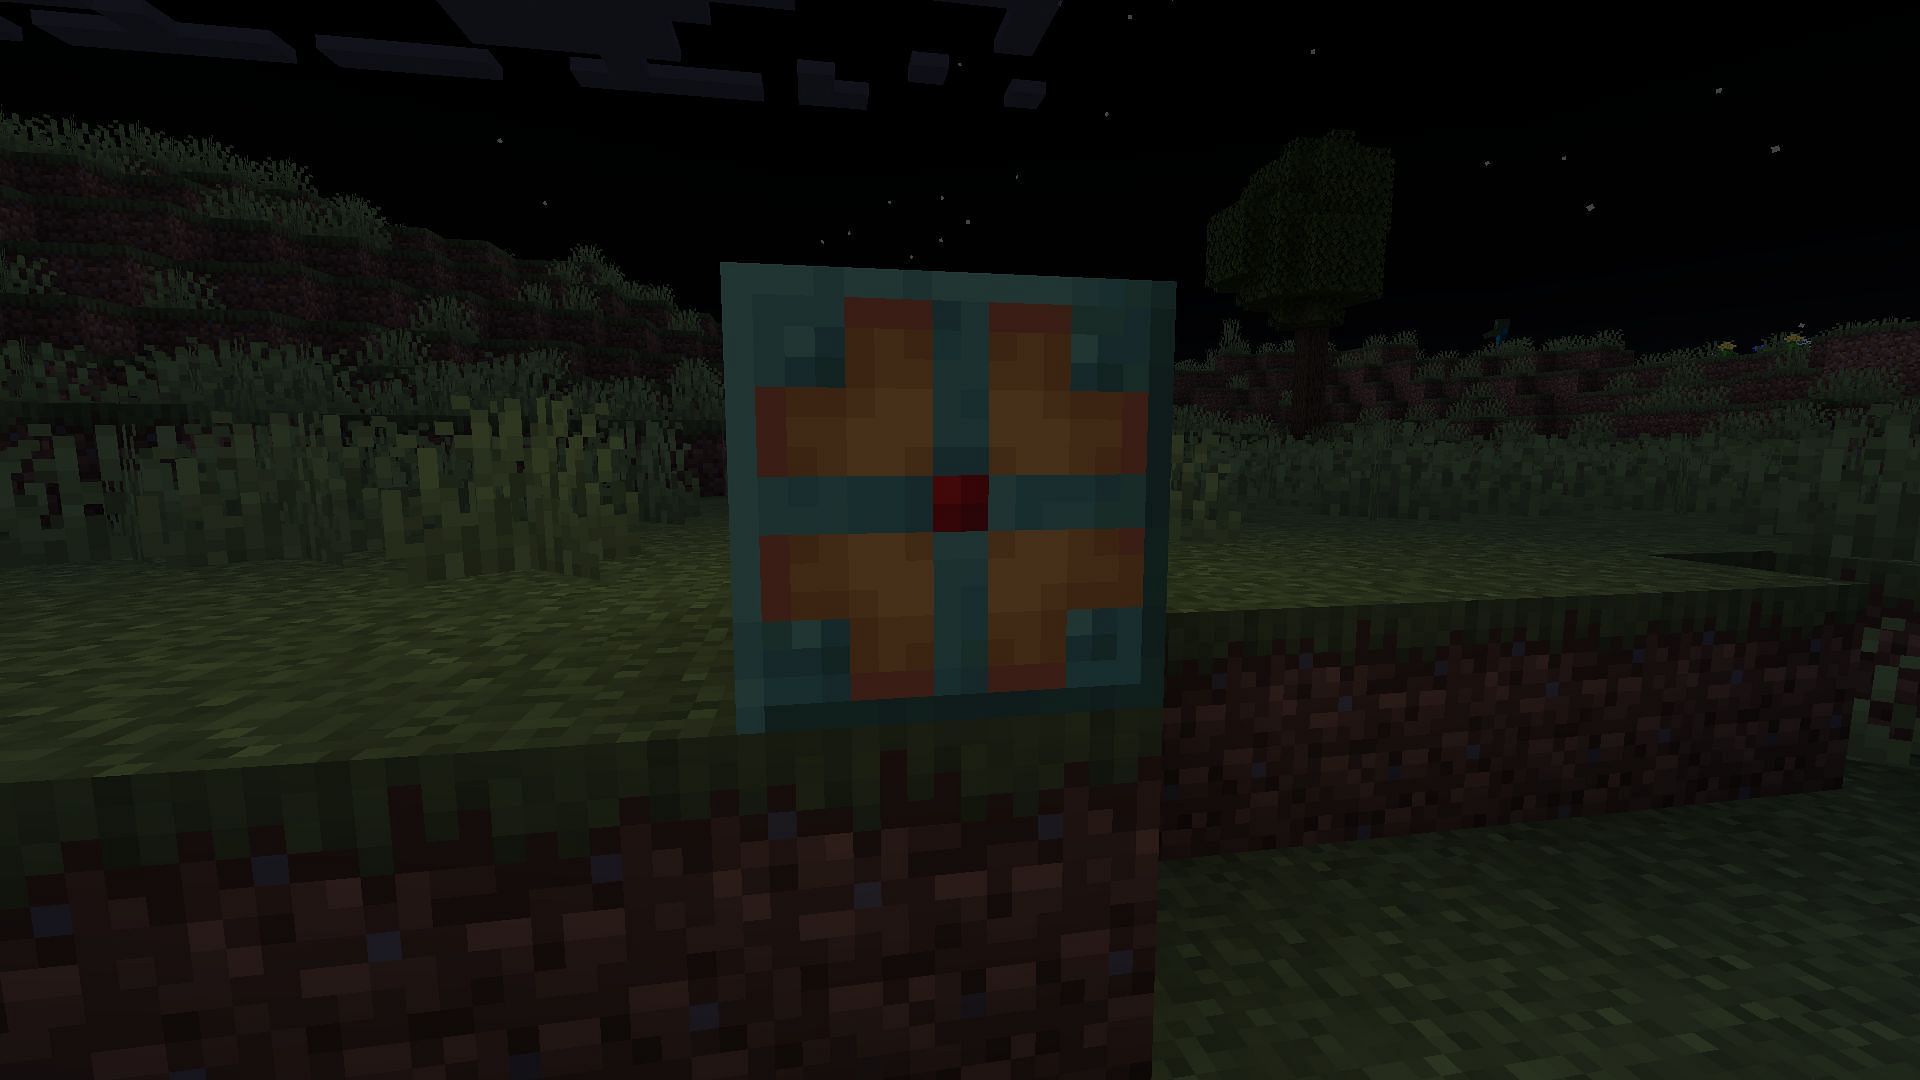 Copper bulbs release less light after oxidizing (Image via Mojang)